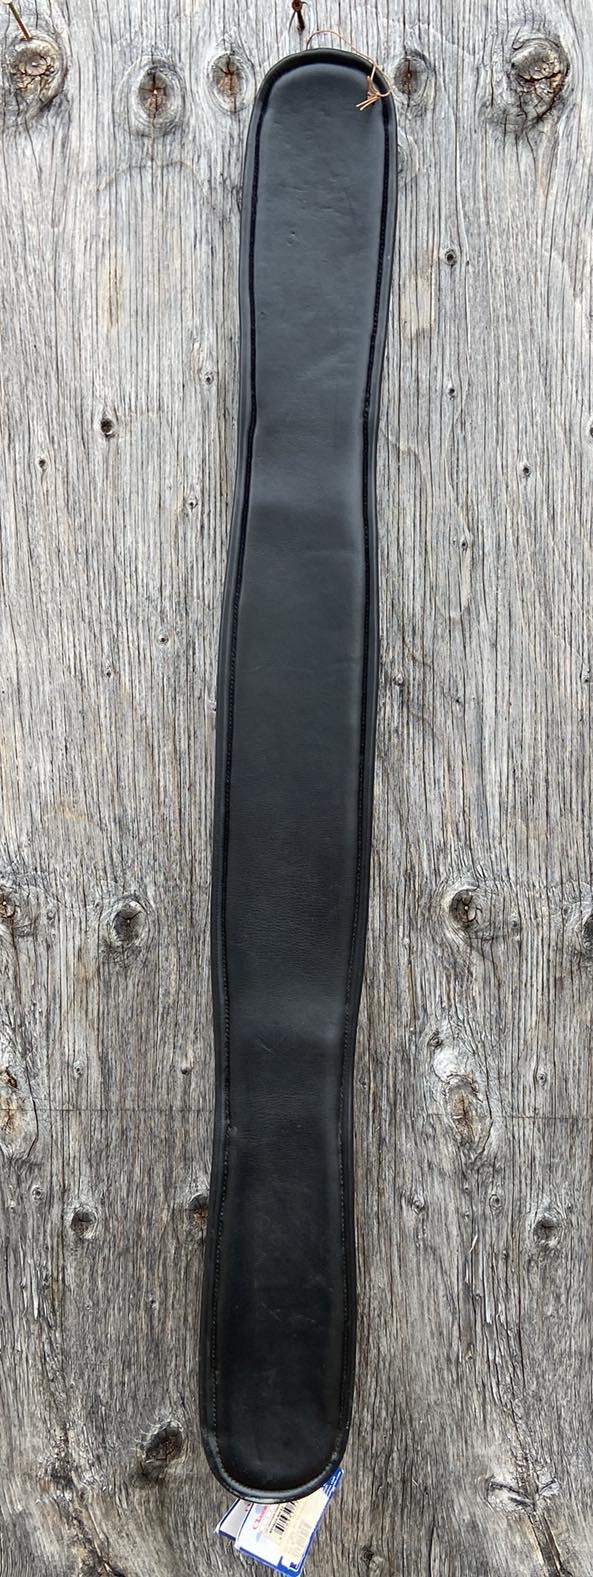 Classic equine padded leather girths